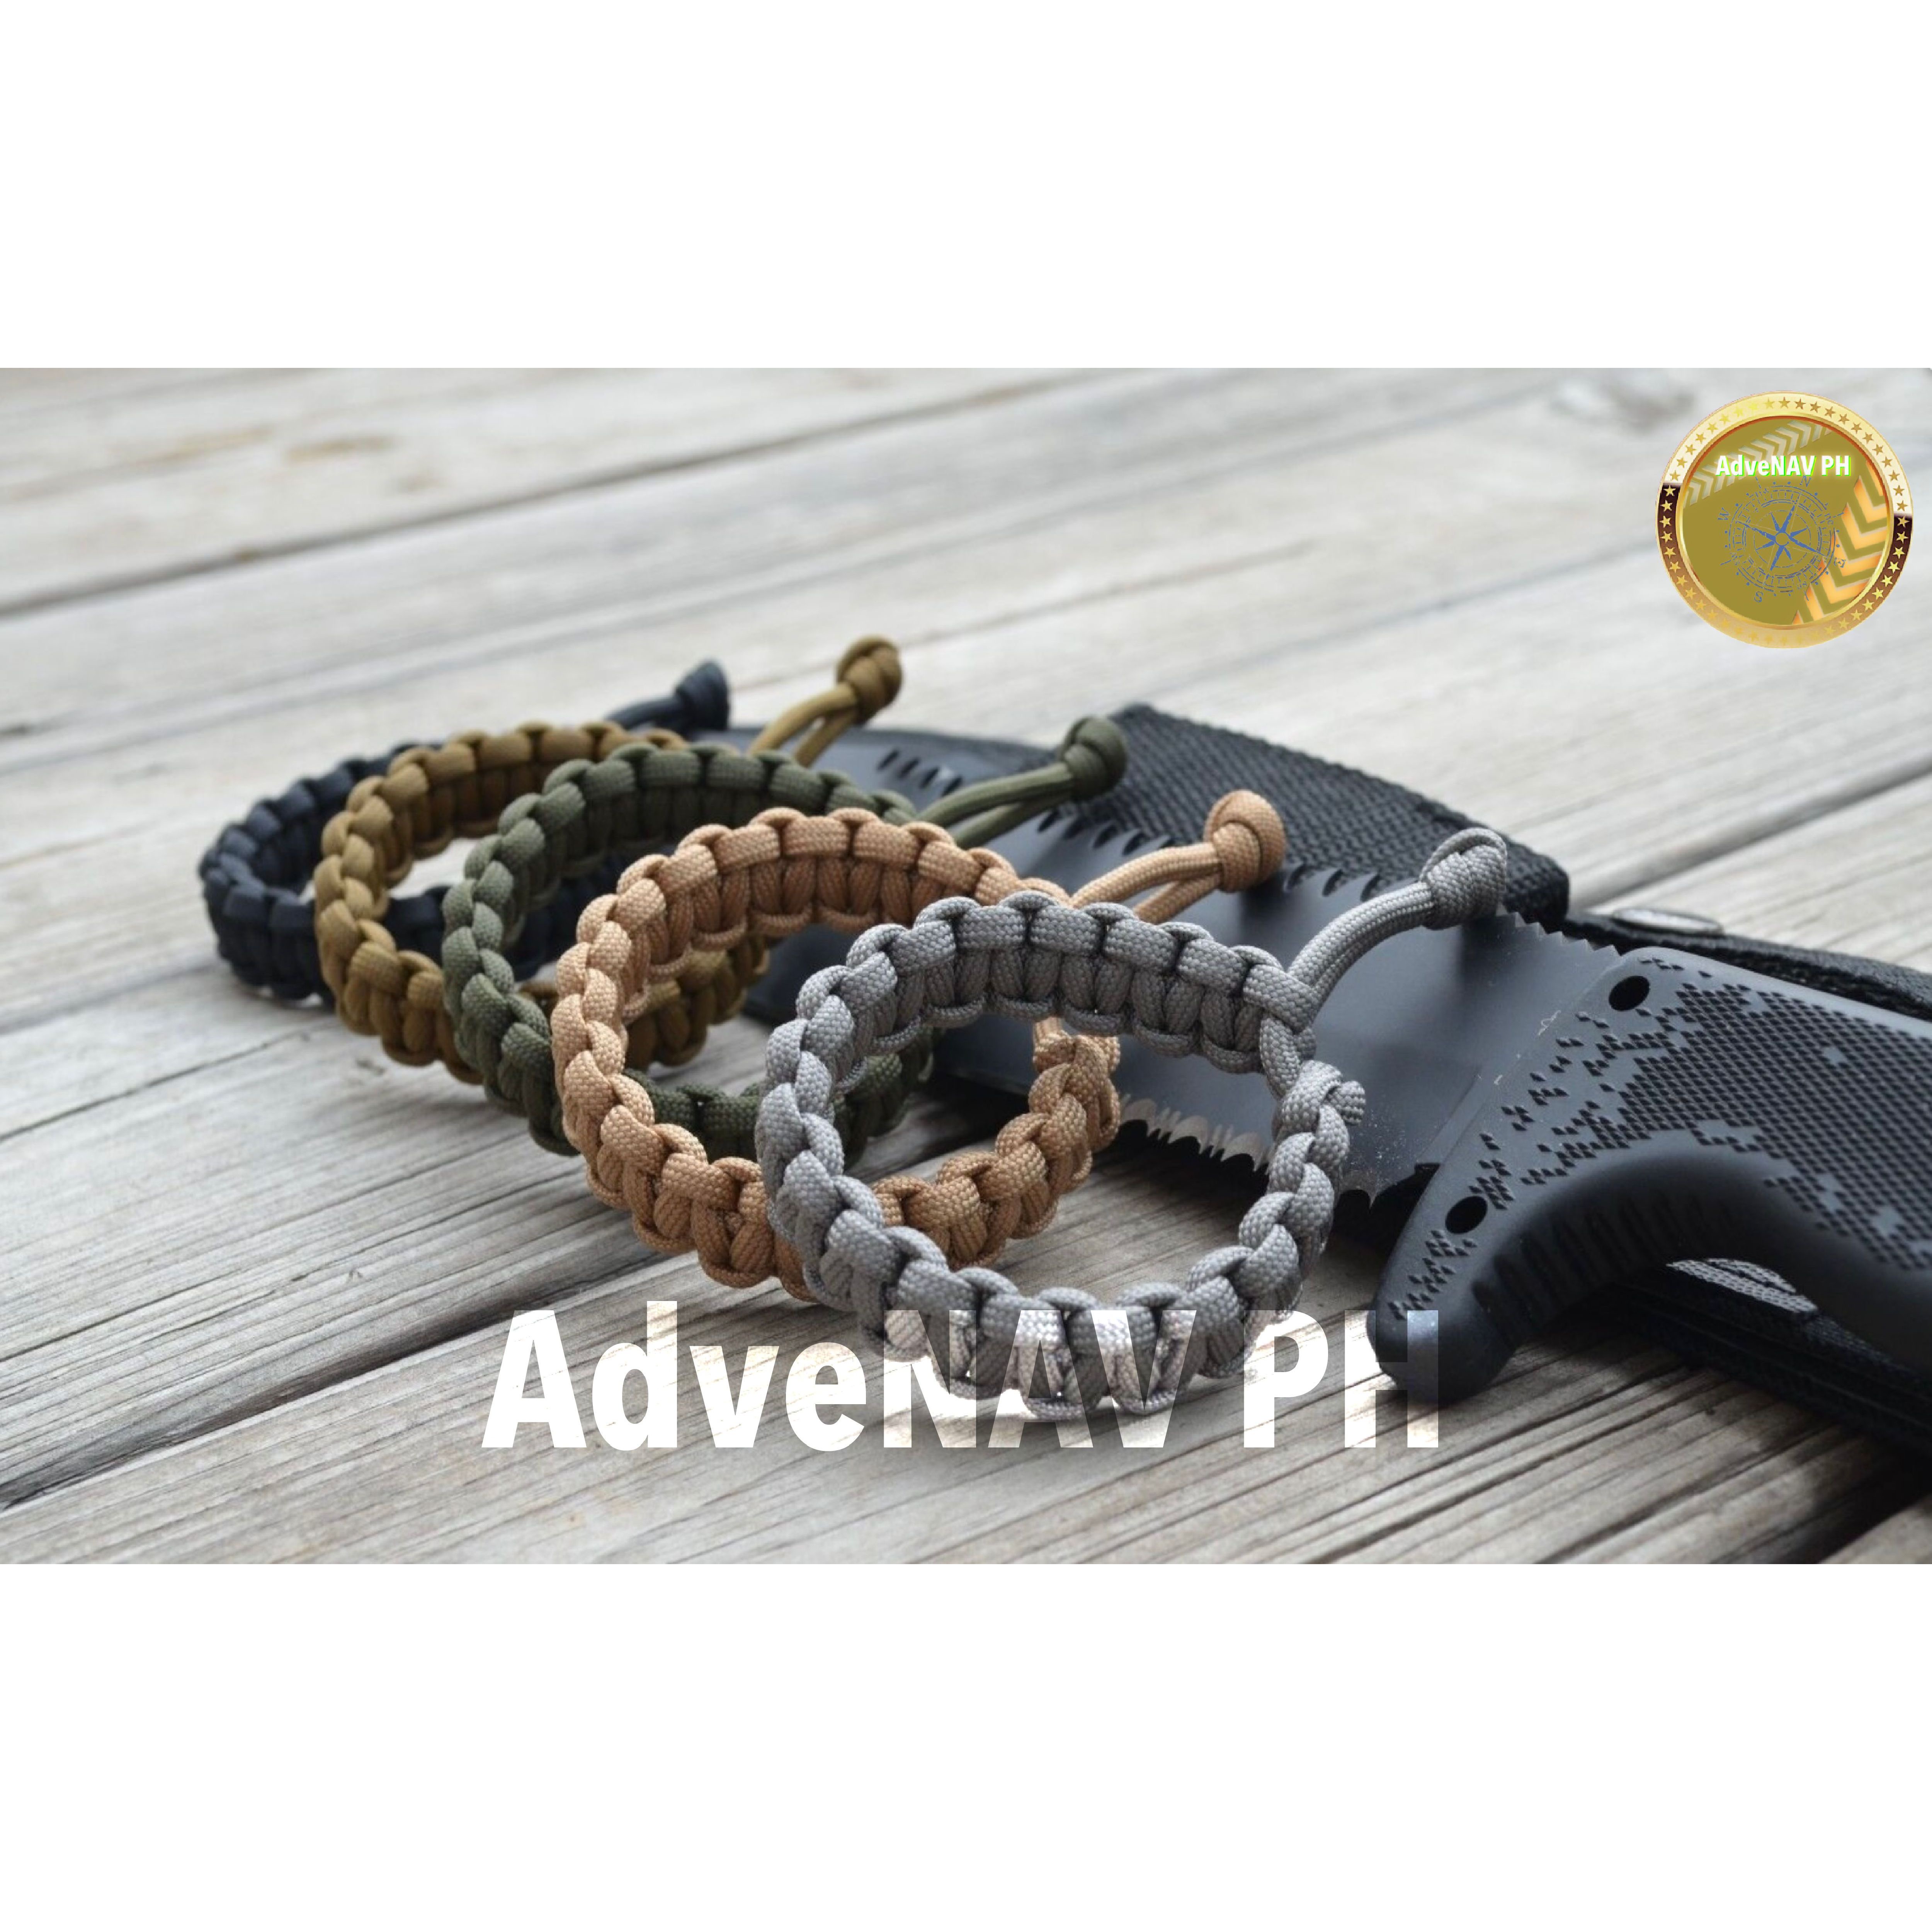 Paracord Survival Bracelet | Promotional Products Manufacturer From Taiwan  - Star Lapel Pin